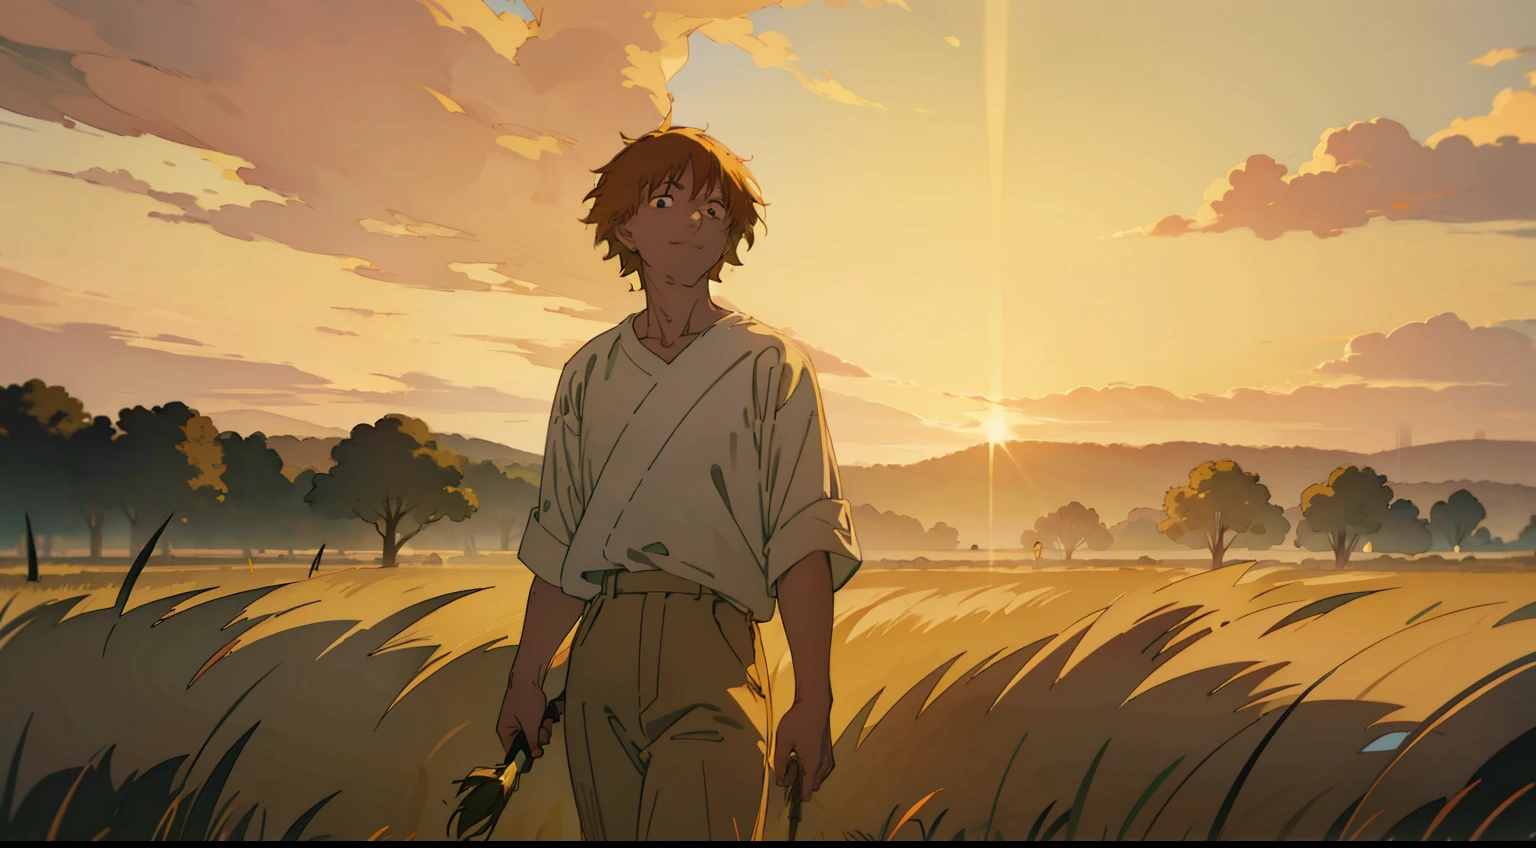 Denji strolling through a field in a white shirt, captured in a breathtaking oil painting by the talented artist Jessica Anderson. The scene depicts Denji's carefree demeanor as he walks amidst blooming flowers and tall grass. The color temperature leans towards warm tones, adding a touch of nostalgia to the artwork. His facial expression exudes tranquility and contentment. The lighting showcases a soft, golden hour glow, emphasizing the peaceful atmosphere that surrounds him. --v 5 --stylize 1000